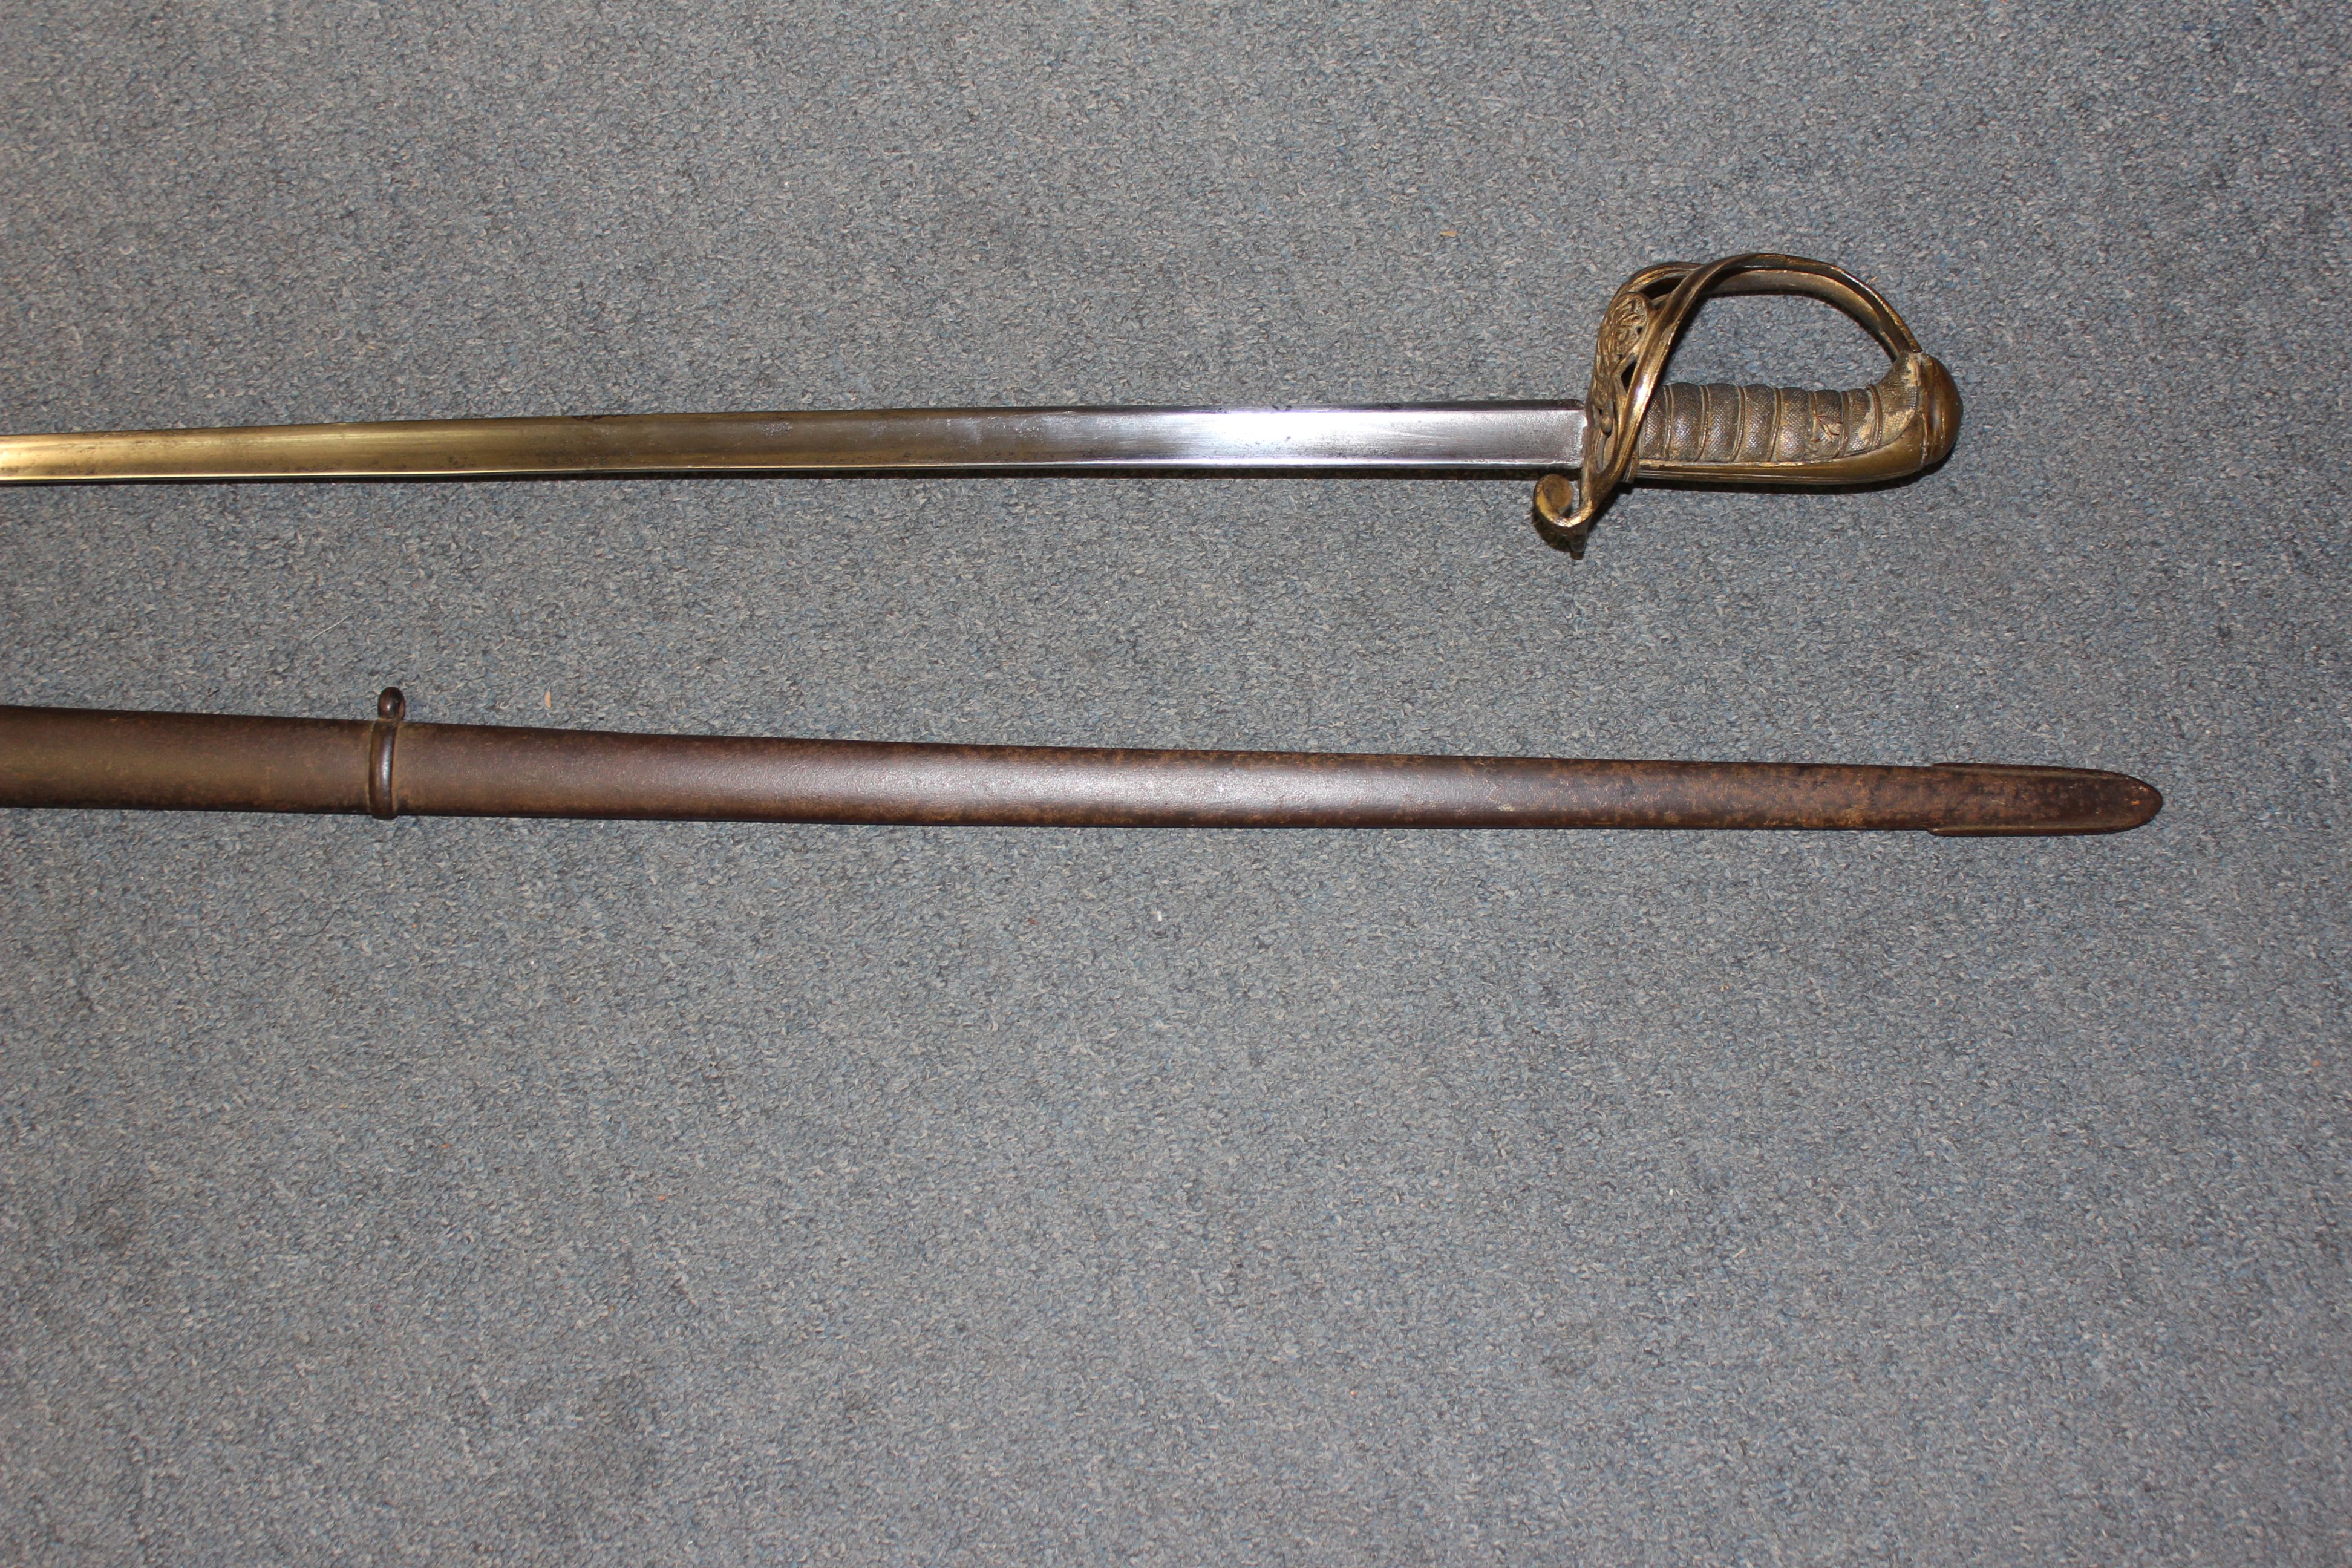 Naval Officer's sword, 28 ins single edged fullered blade, swept bar hilt with fouled anchor cypher, - Image 5 of 9